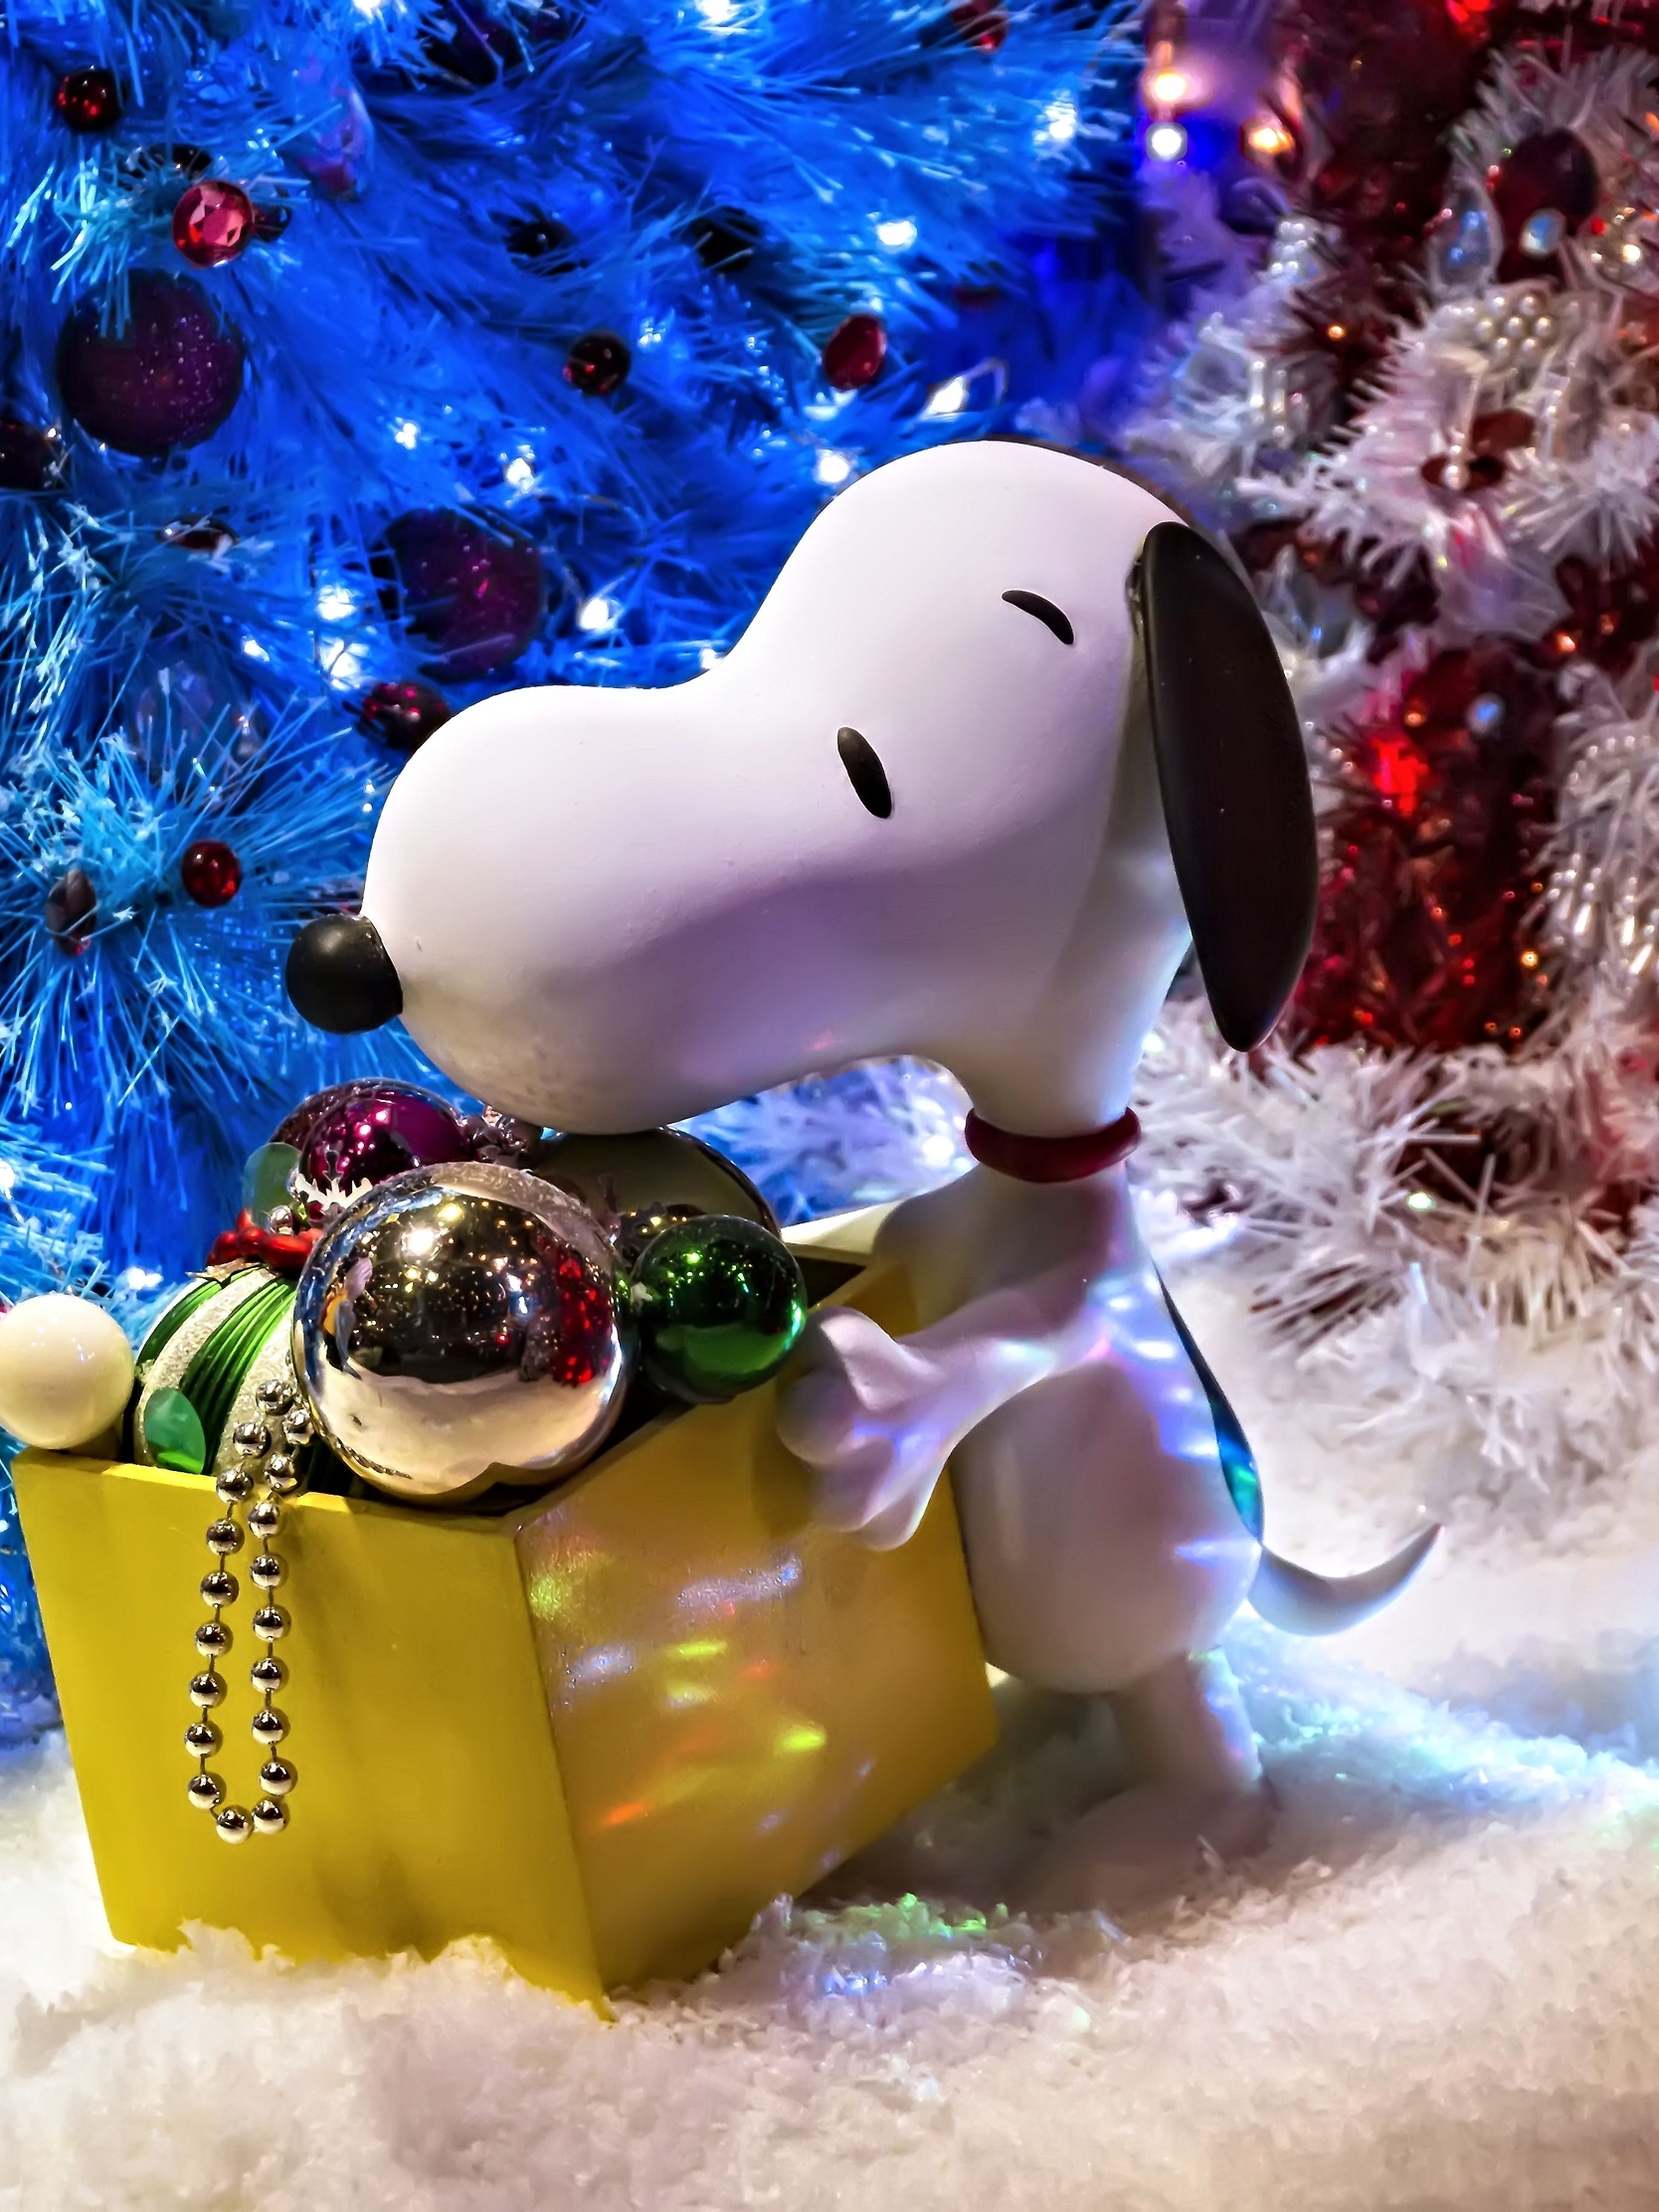 Image: Tree, balls, beads, toy, puppy, box, New year, snow, decoration, holiday